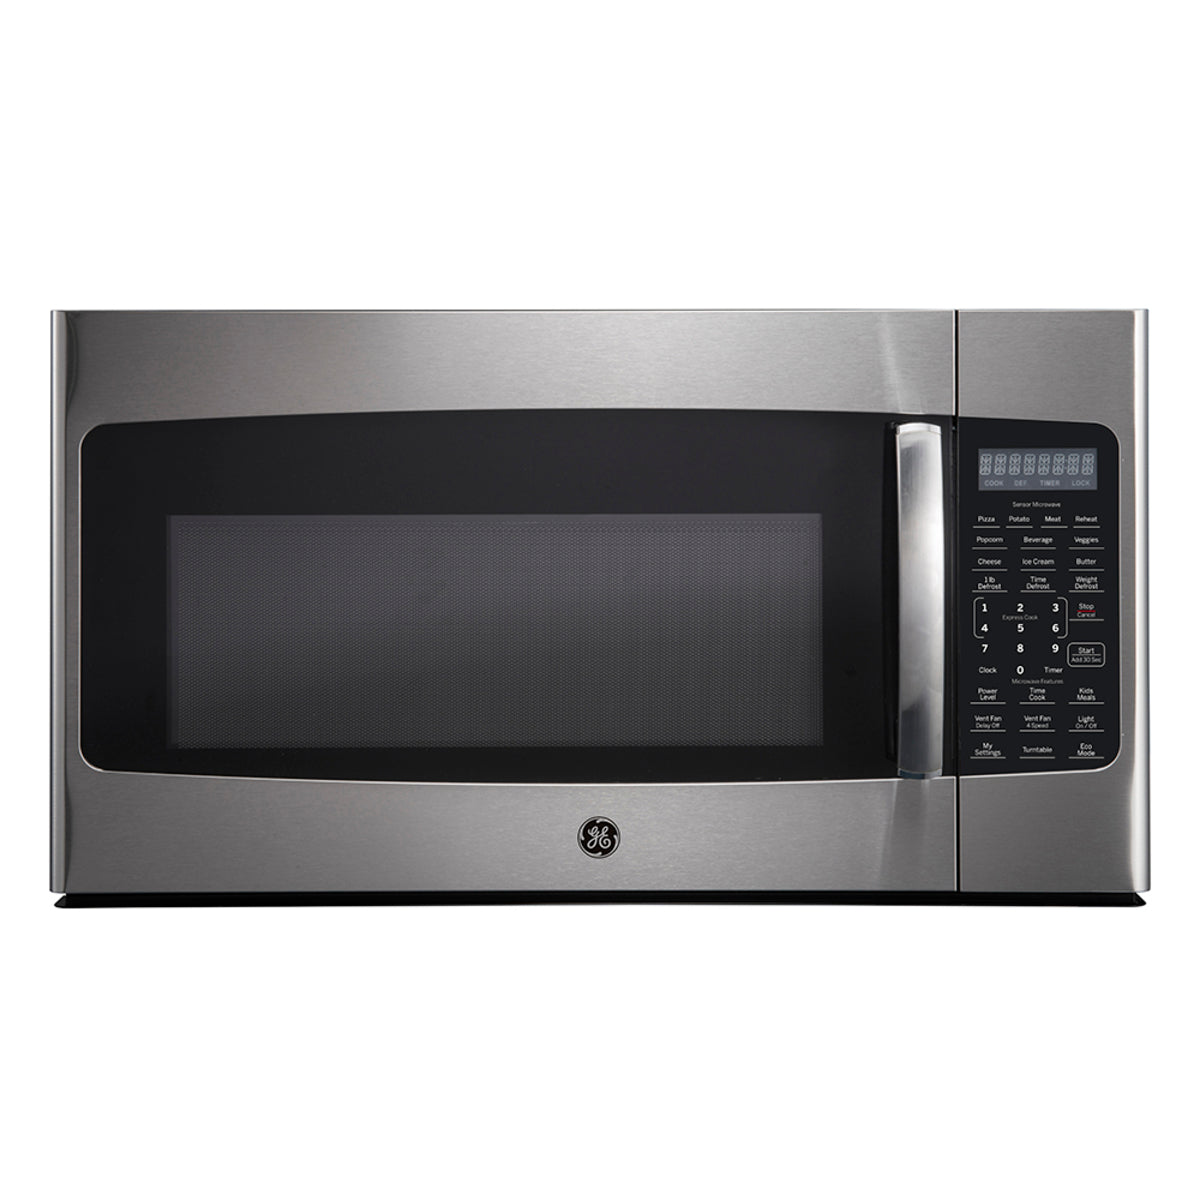 GE - 1.8 cu. Ft  Over the range Microwave in Stainless - JVM2185SMSS